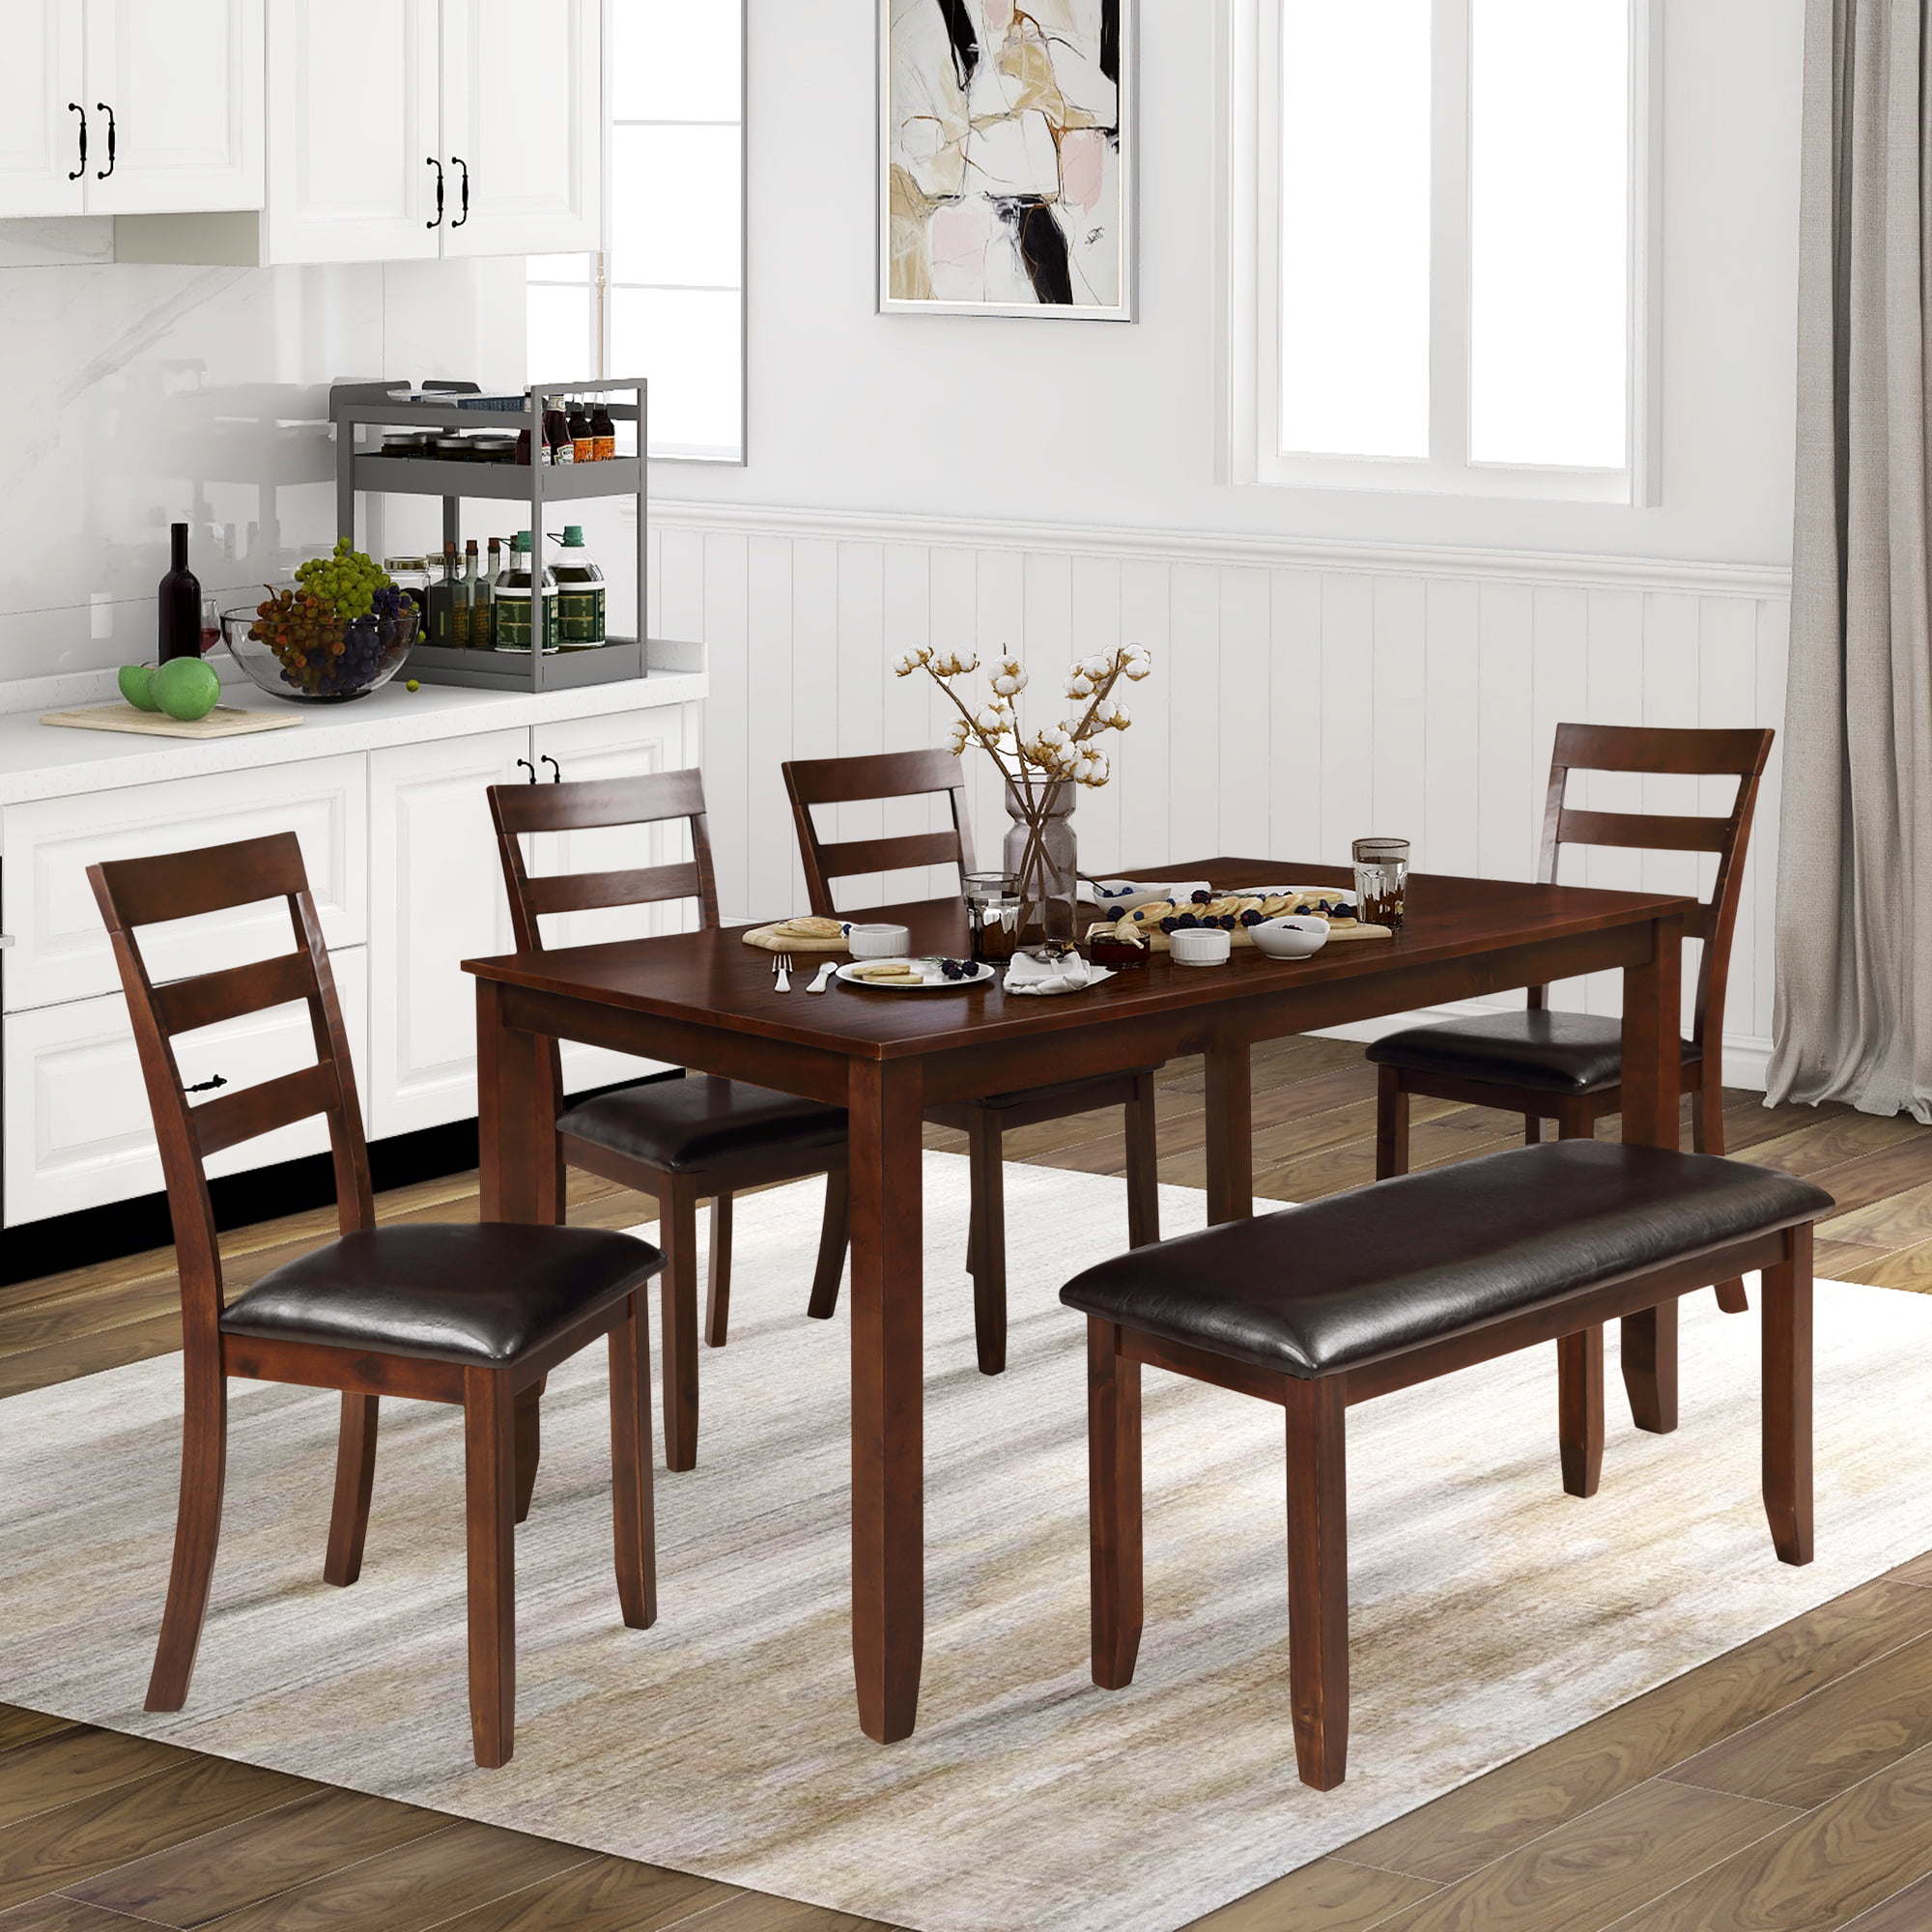 6 Piece Dining Table Set, Modern Dining Table Sets with 4 Dining Chairs